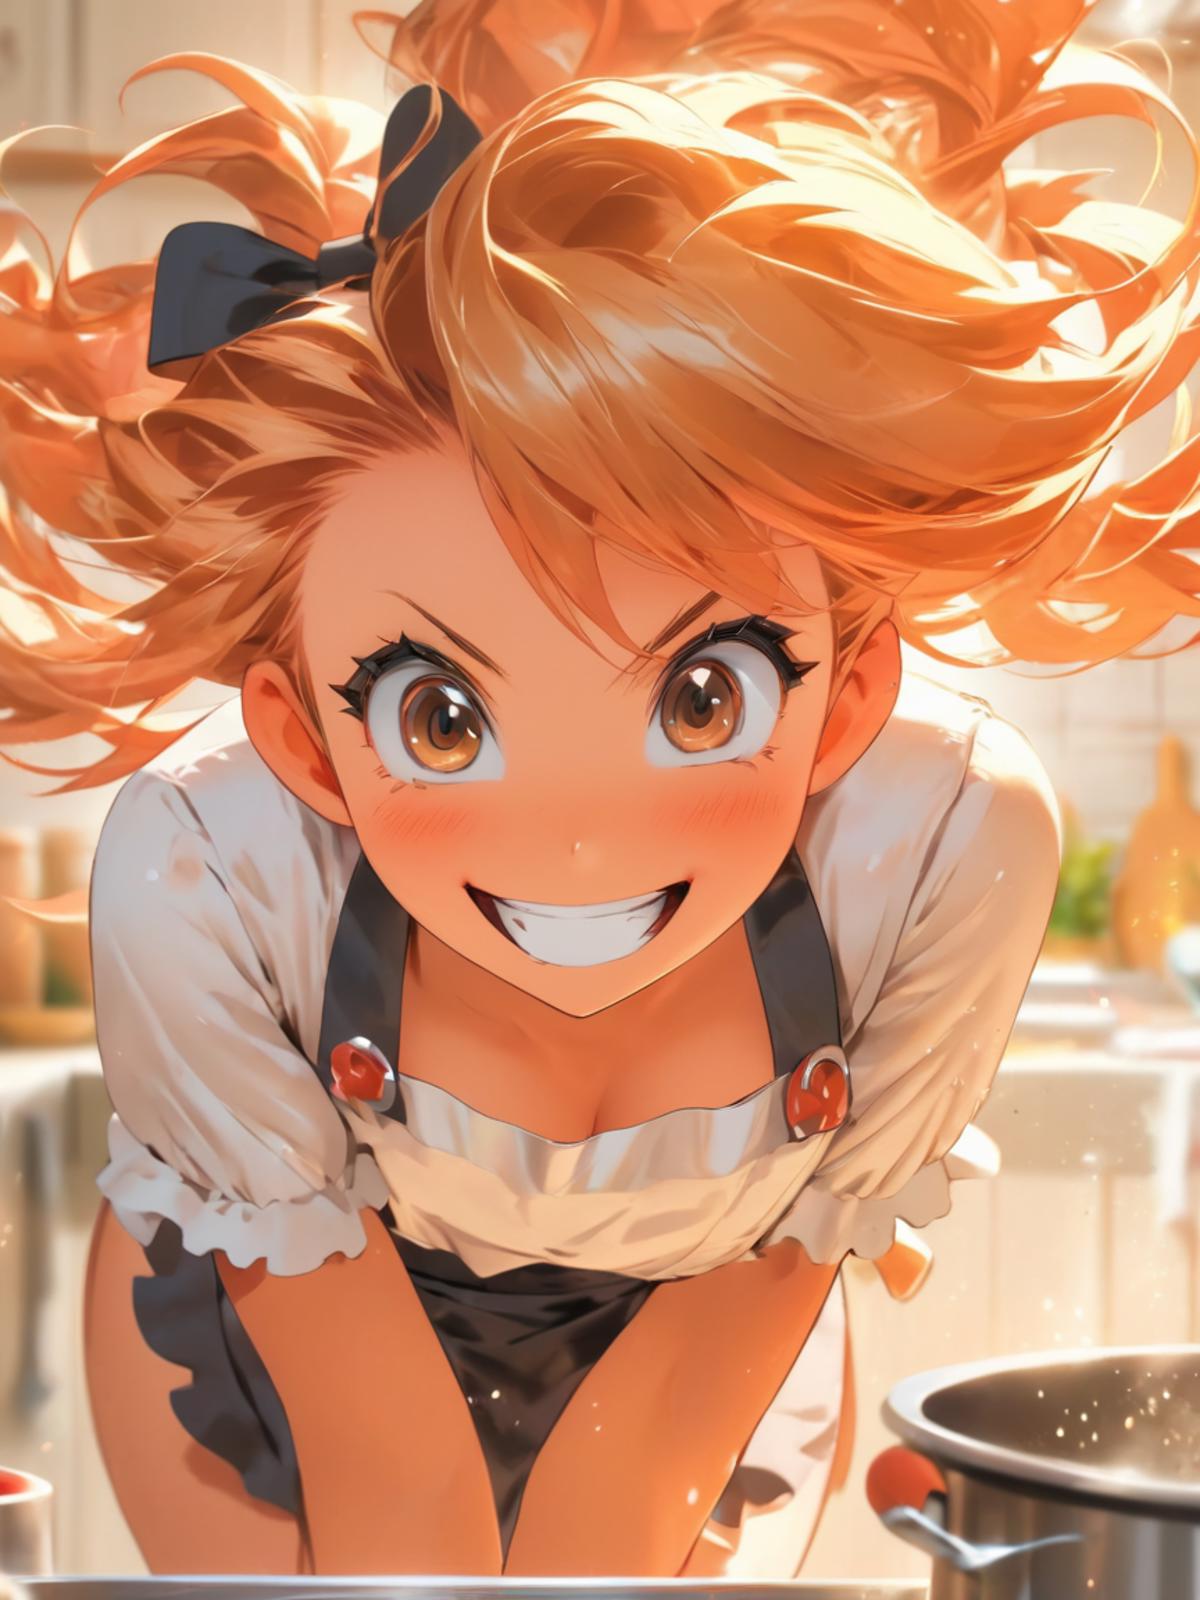 Anime-style girl with red eyes, smiling and posing in a kitchen.